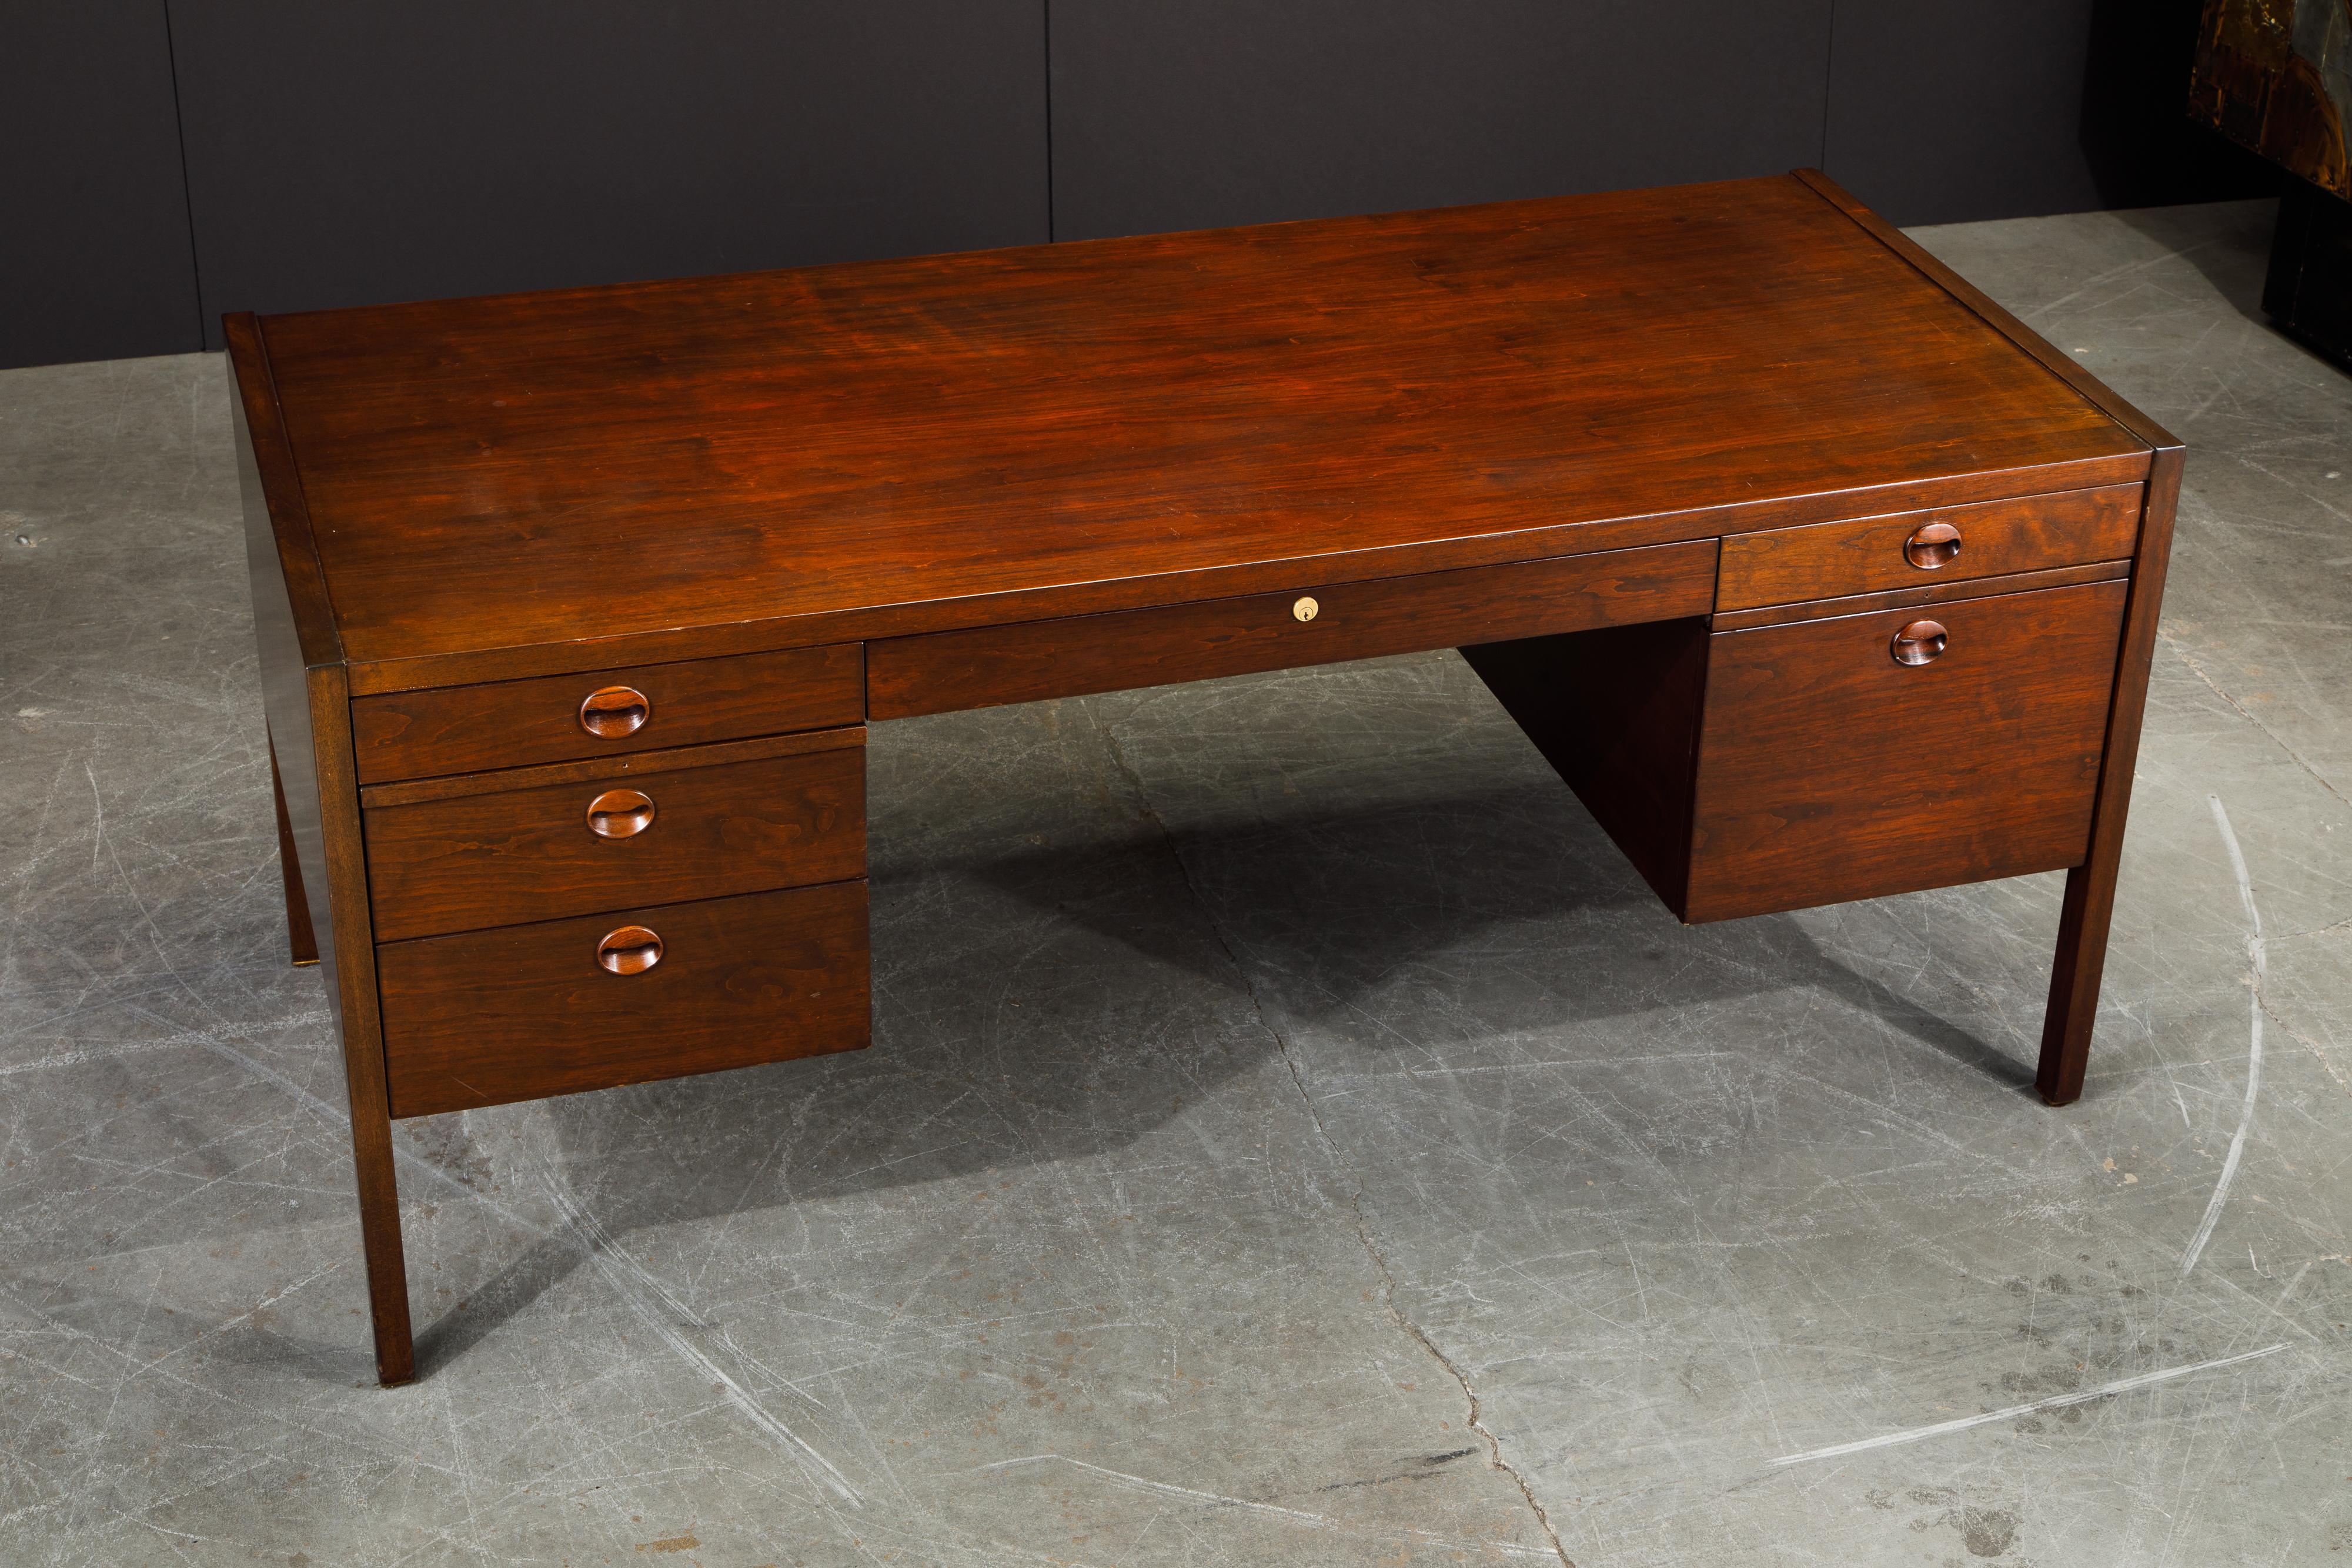 Rosewood and Mahogany Executive Desk by Edward Wormley for Dunbar, 1963, Signed 9